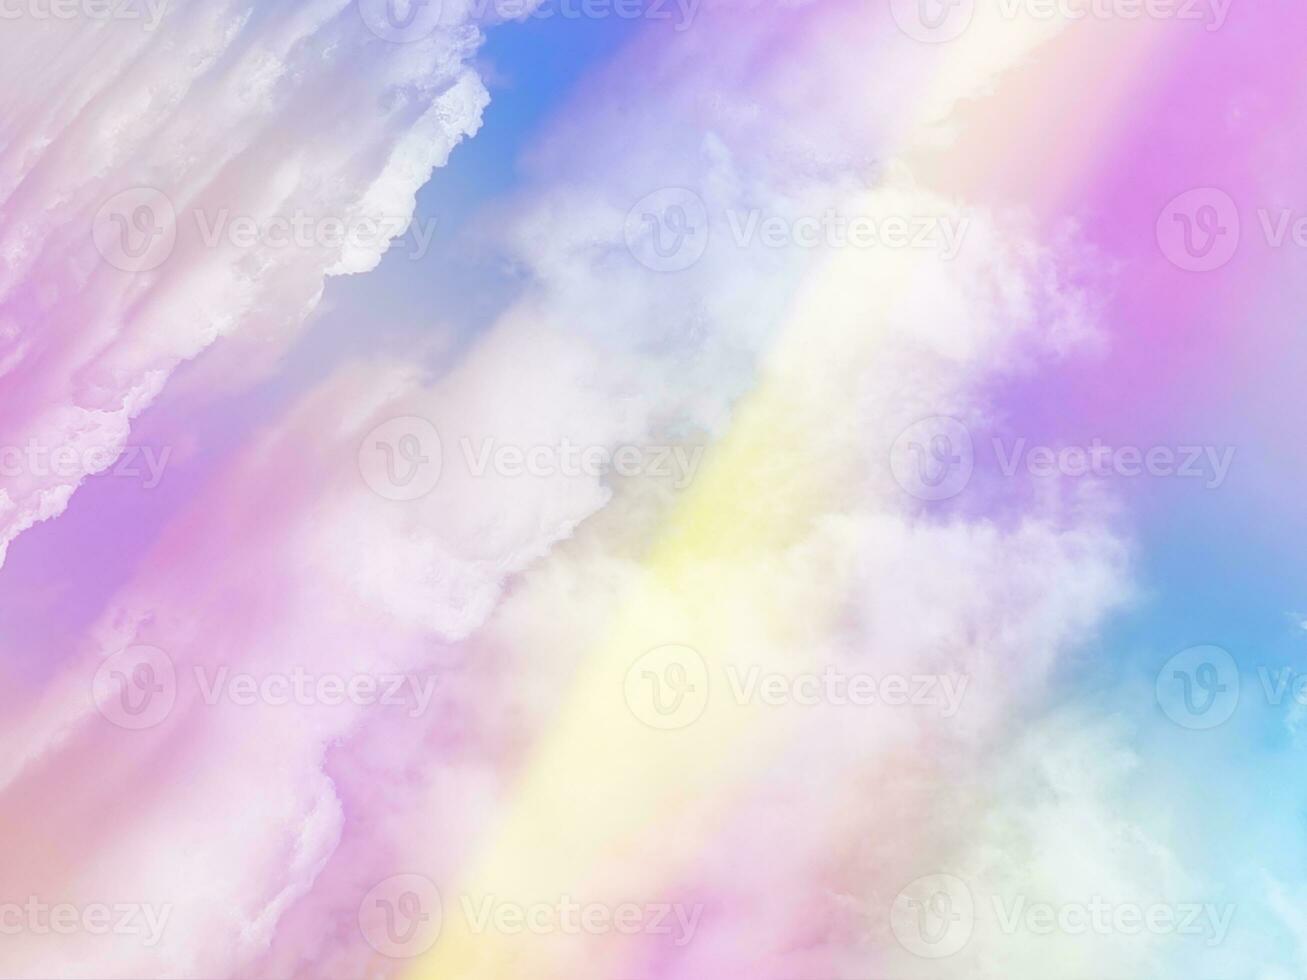 beauty sweet pastel purple yellow  colorful with fluffy clouds on sky. multi color rainbow image. abstract fantasy growing light photo